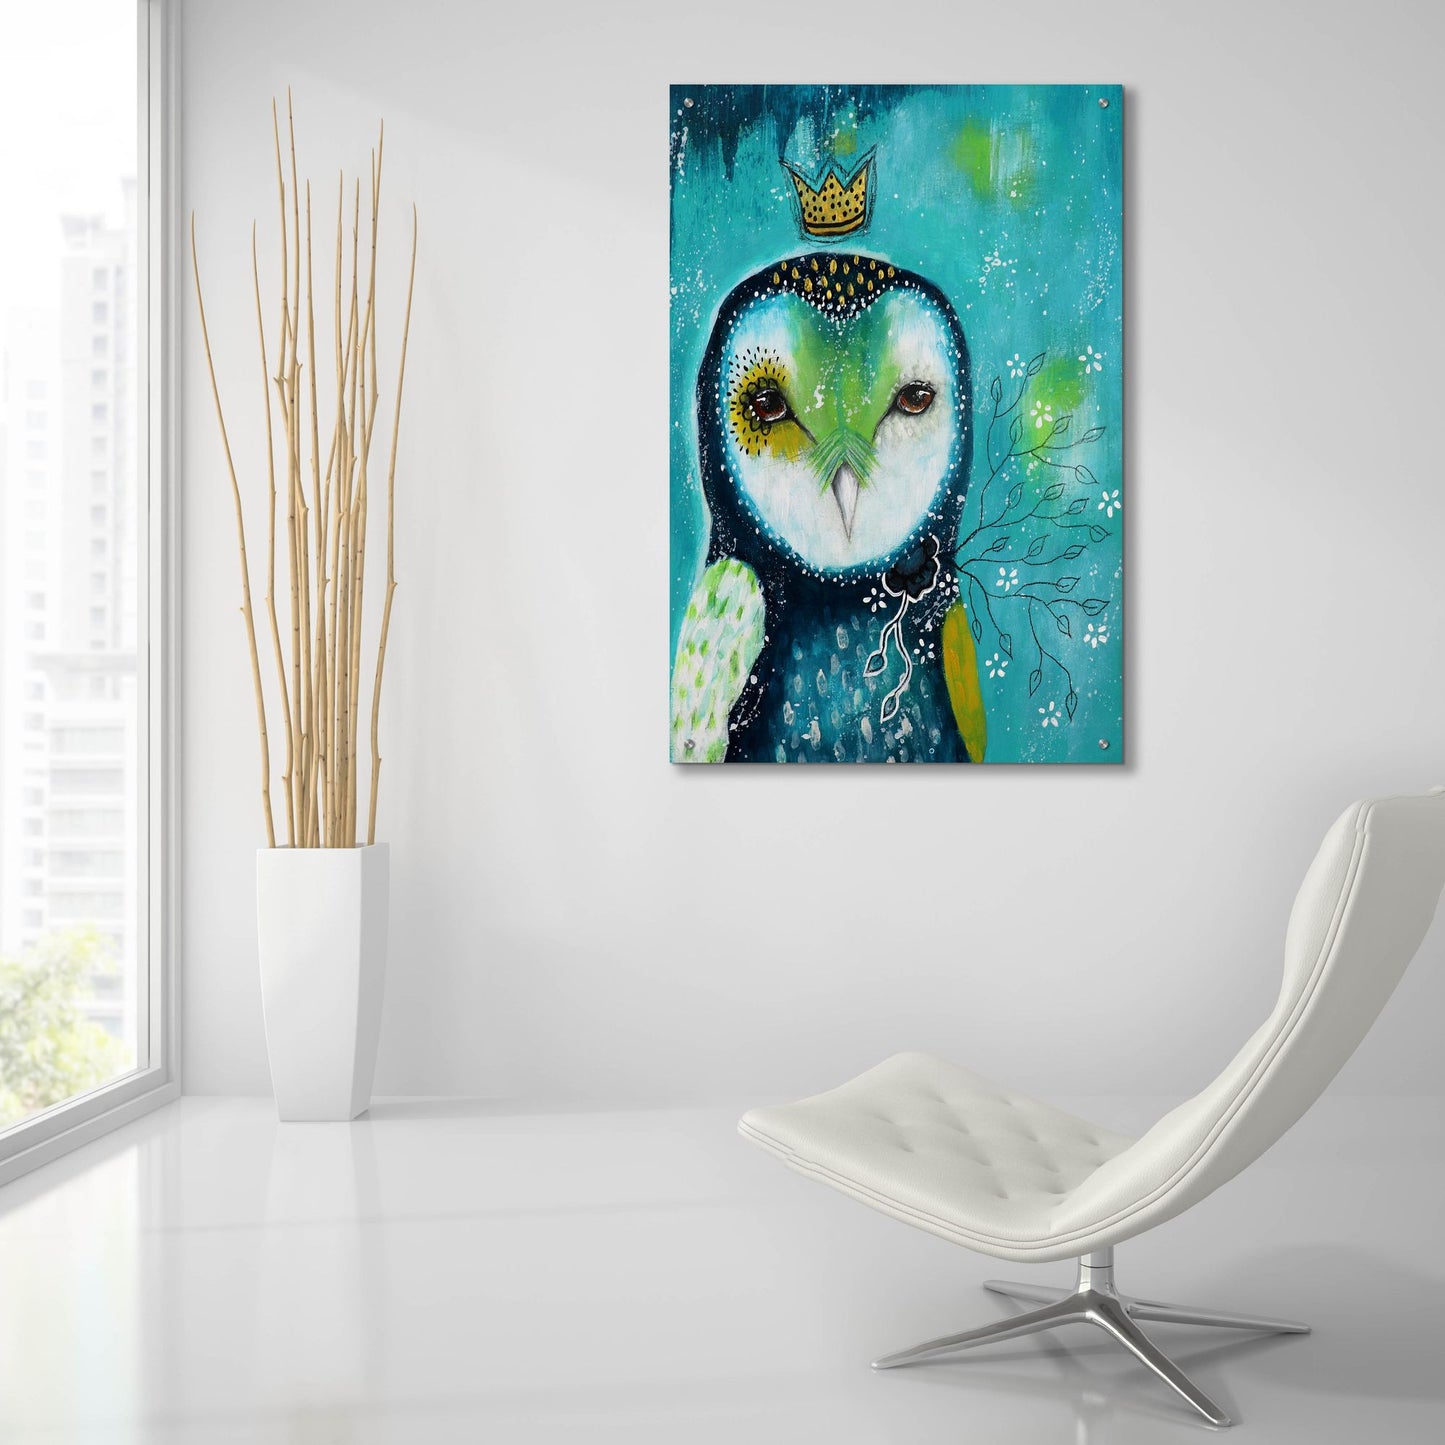 Epic Art 'I Offer You Love' by The Secret Hermit, Acrylic Glass Wall Art,24x36